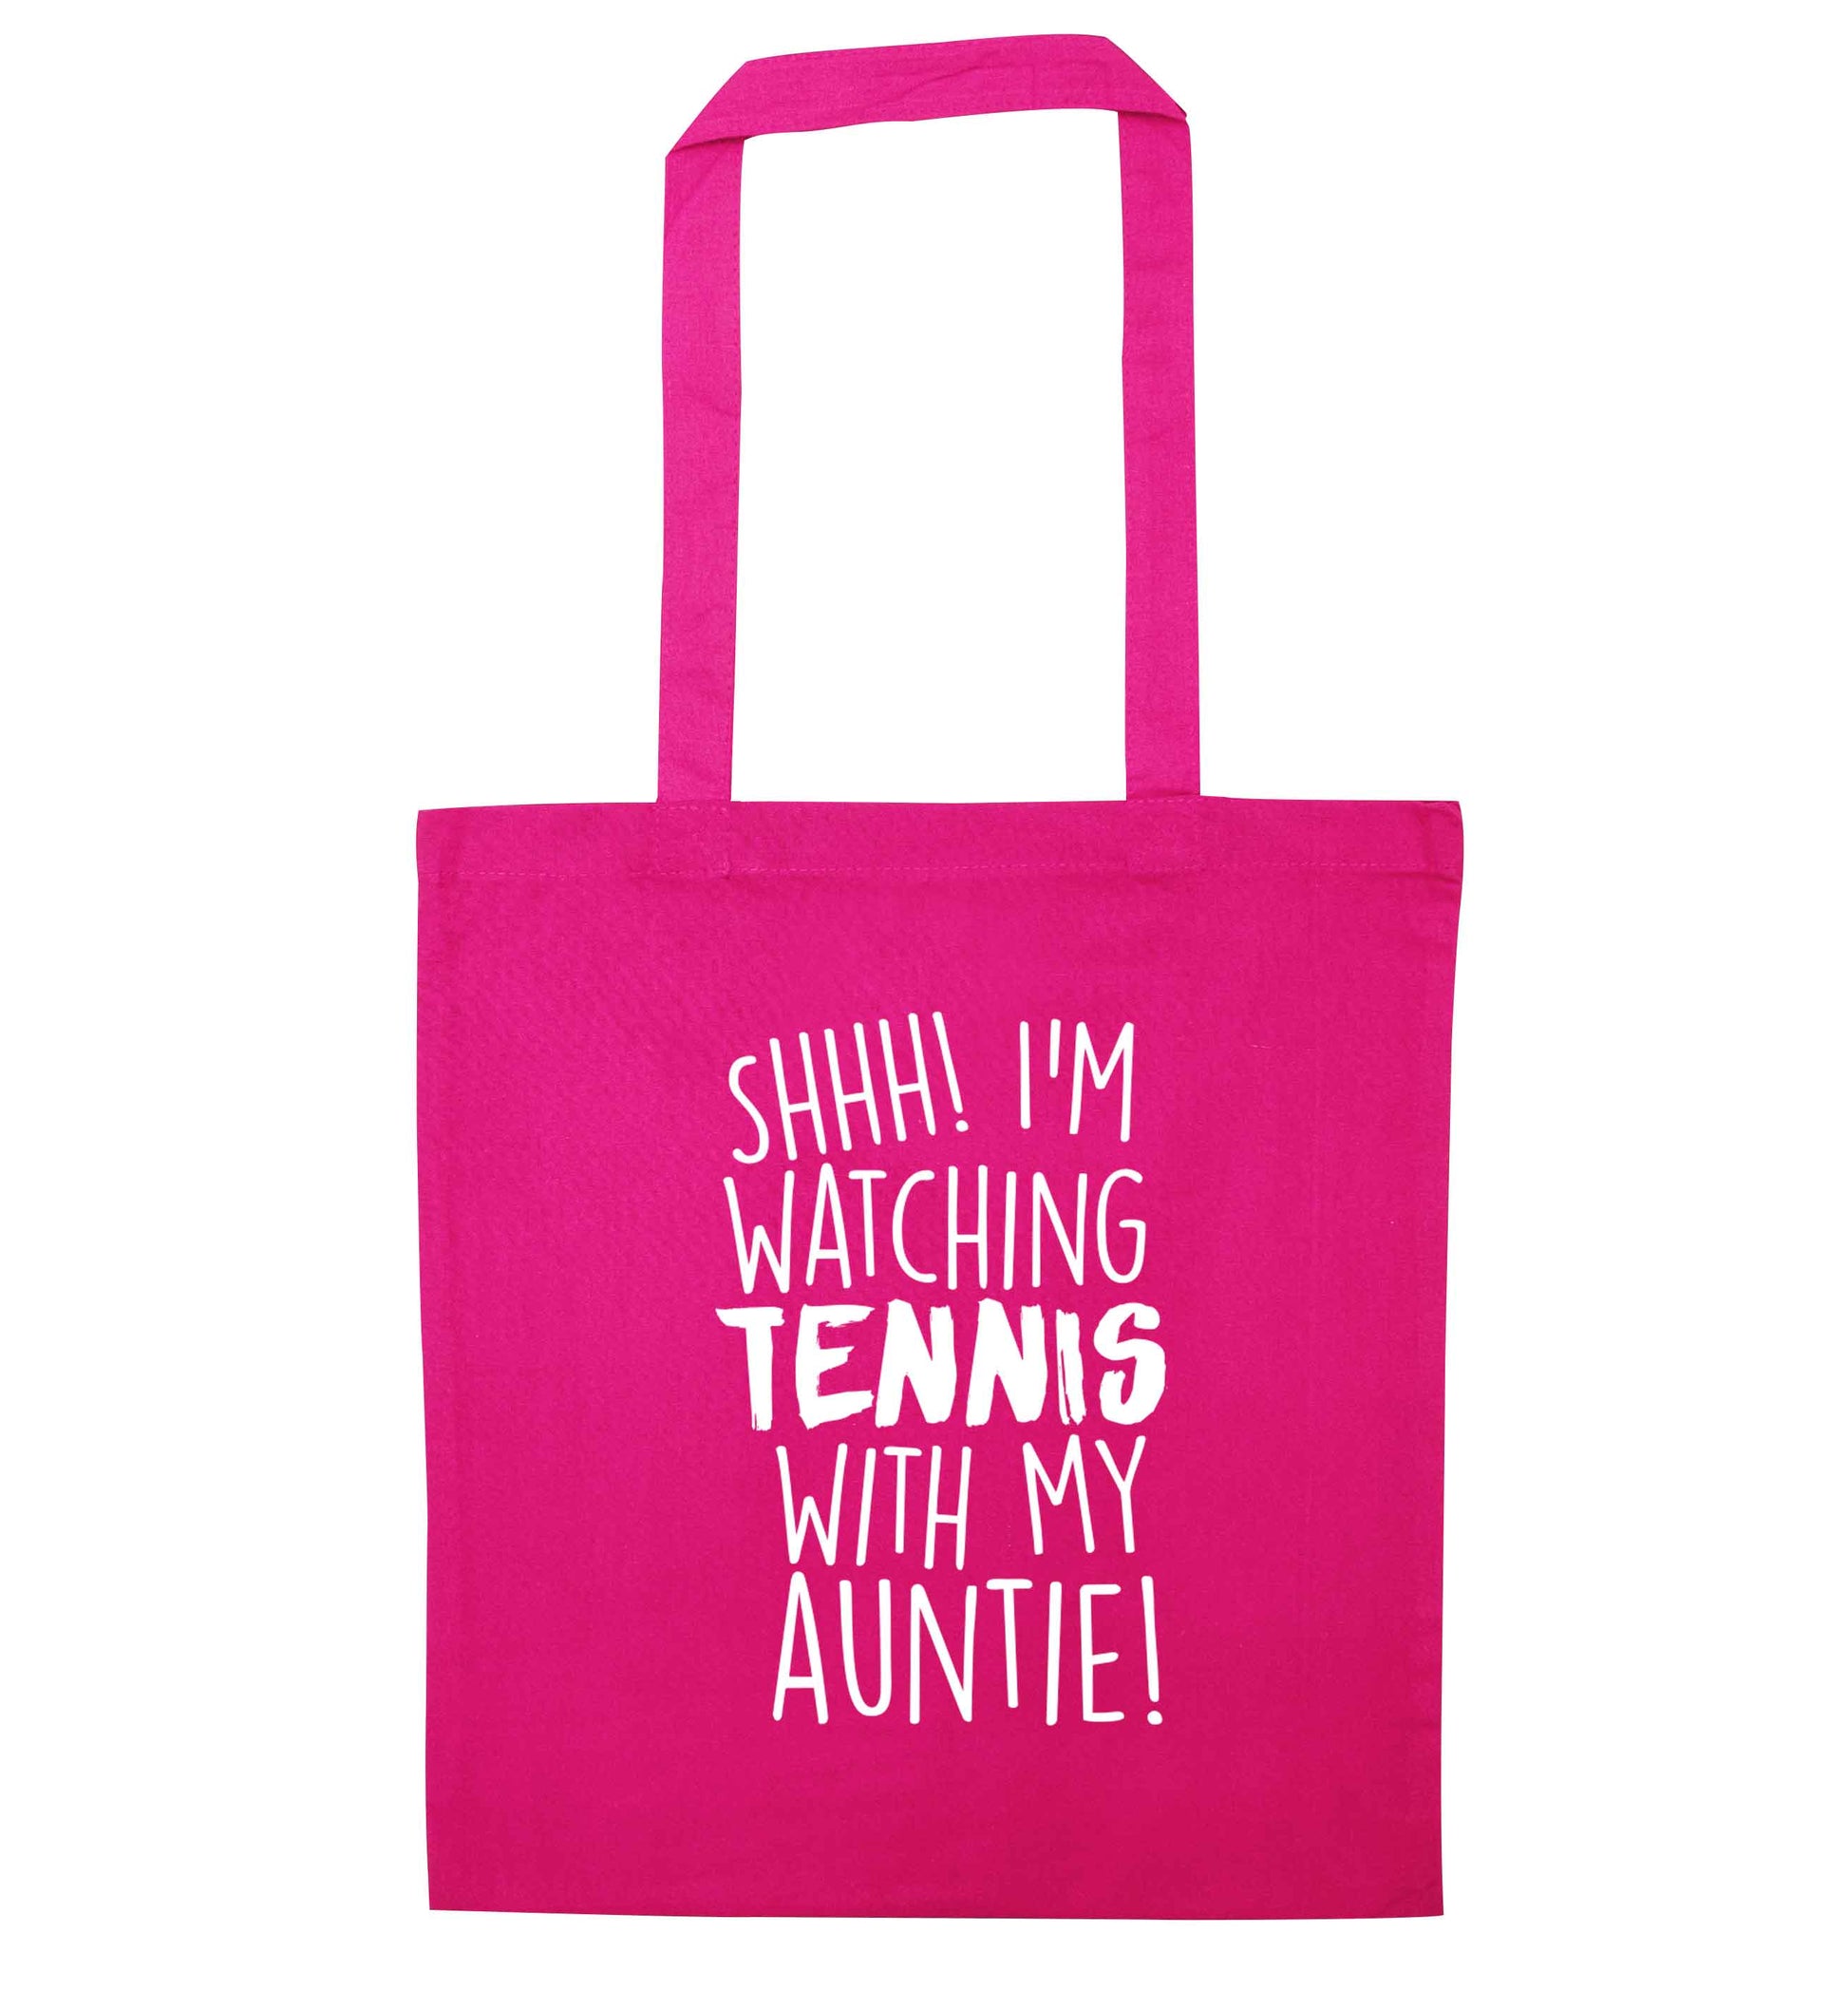 Shh! I'm watching tennis with my auntie! pink tote bag